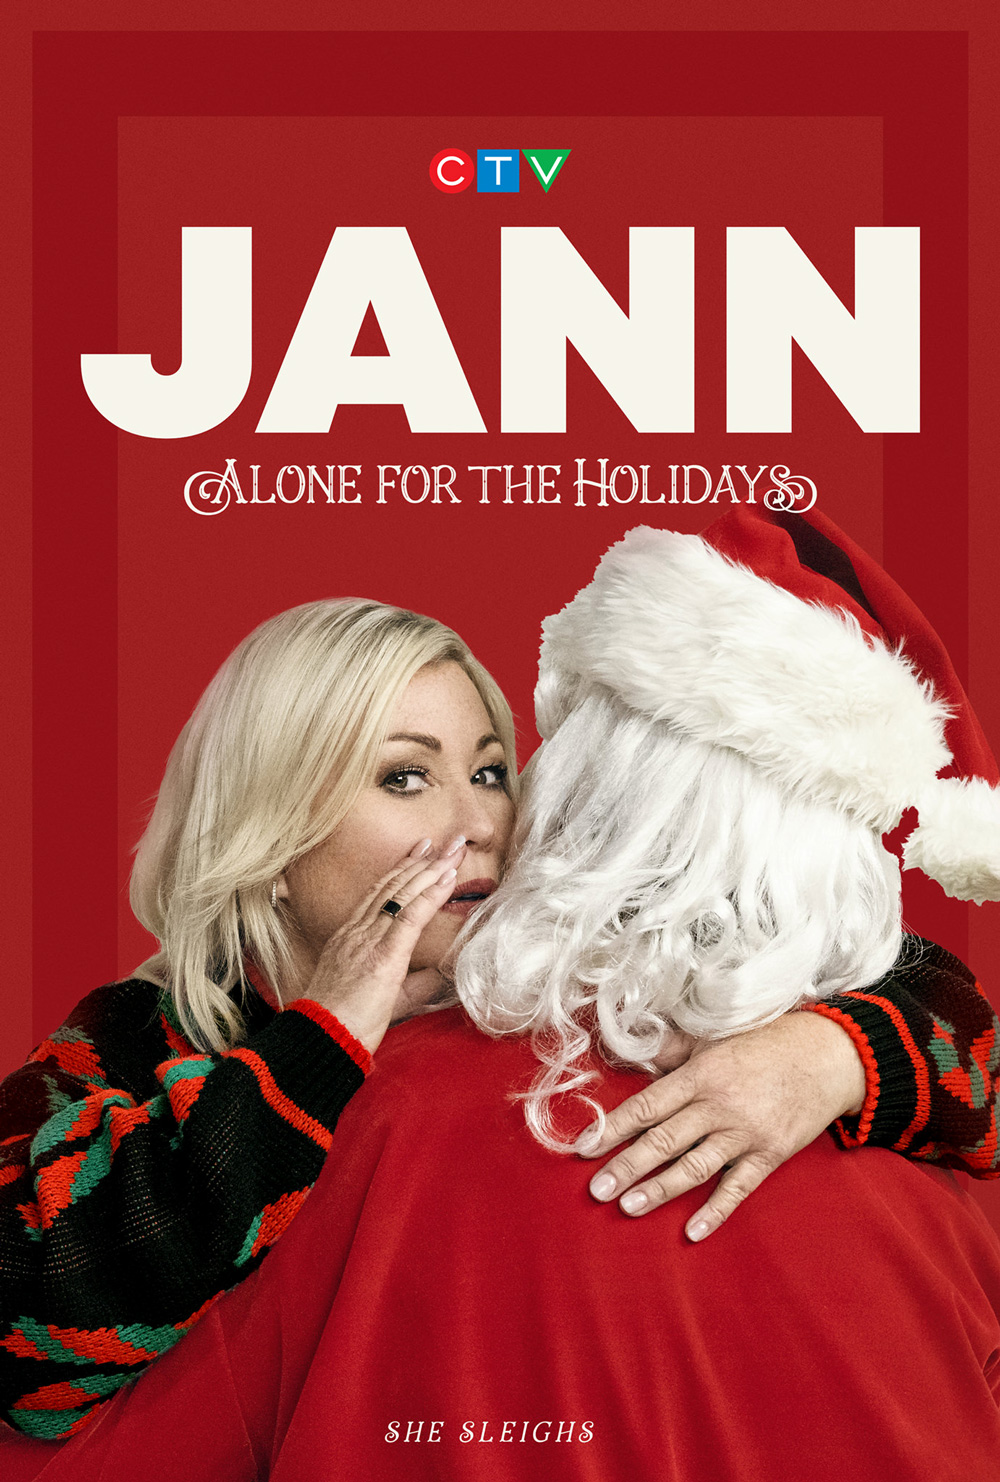 JANN: Alone for the Holidays